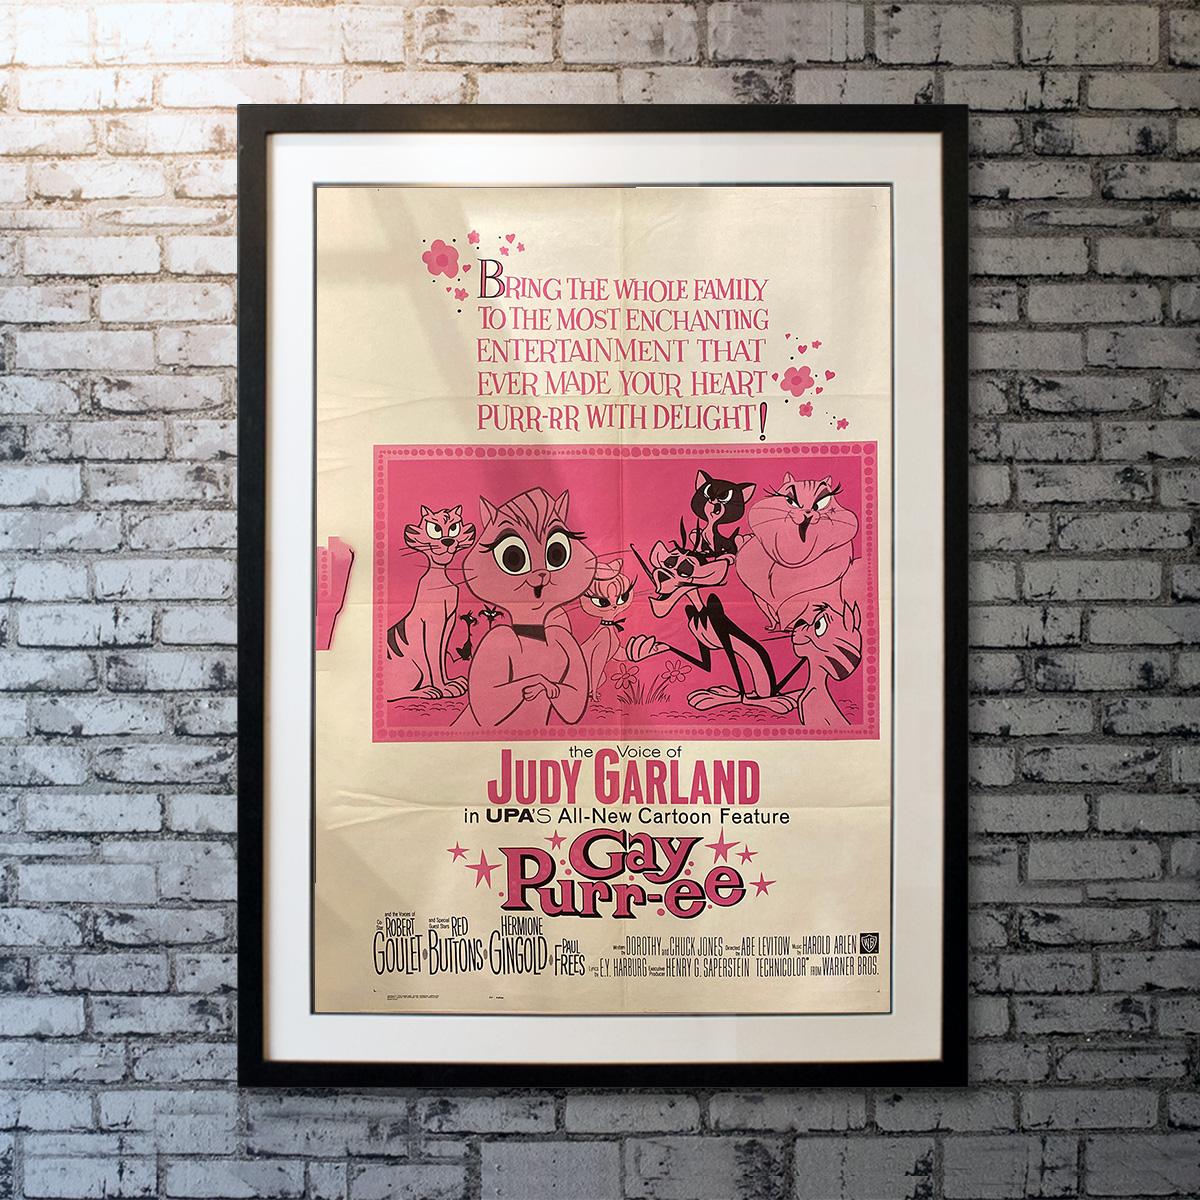 This animated musical concerns Mewsette (Judy Garland), a starry-eyed cat who grows weary of life on a French farm and heads for the excitement of 1890s Paris. Her tomcat suitor, Jaune-Tom (Robert Goulet), and his furry cohort, Robespierre (Red